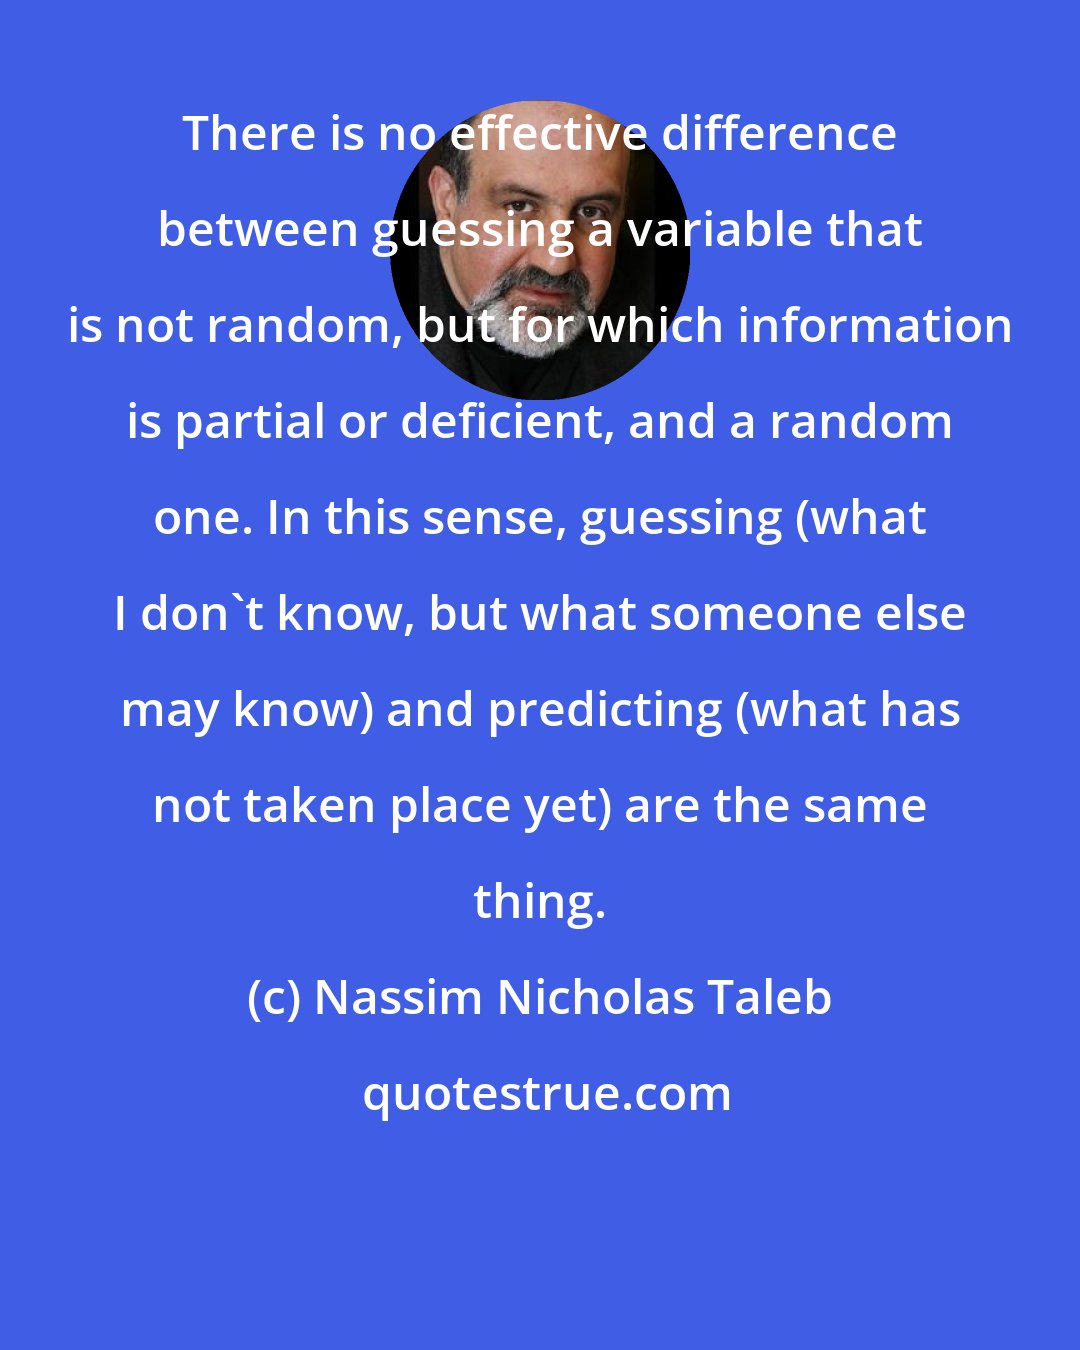 Nassim Nicholas Taleb: There is no effective difference between guessing a variable that is not random, but for which information is partial or deficient, and a random one. In this sense, guessing (what I don't know, but what someone else may know) and predicting (what has not taken place yet) are the same thing.